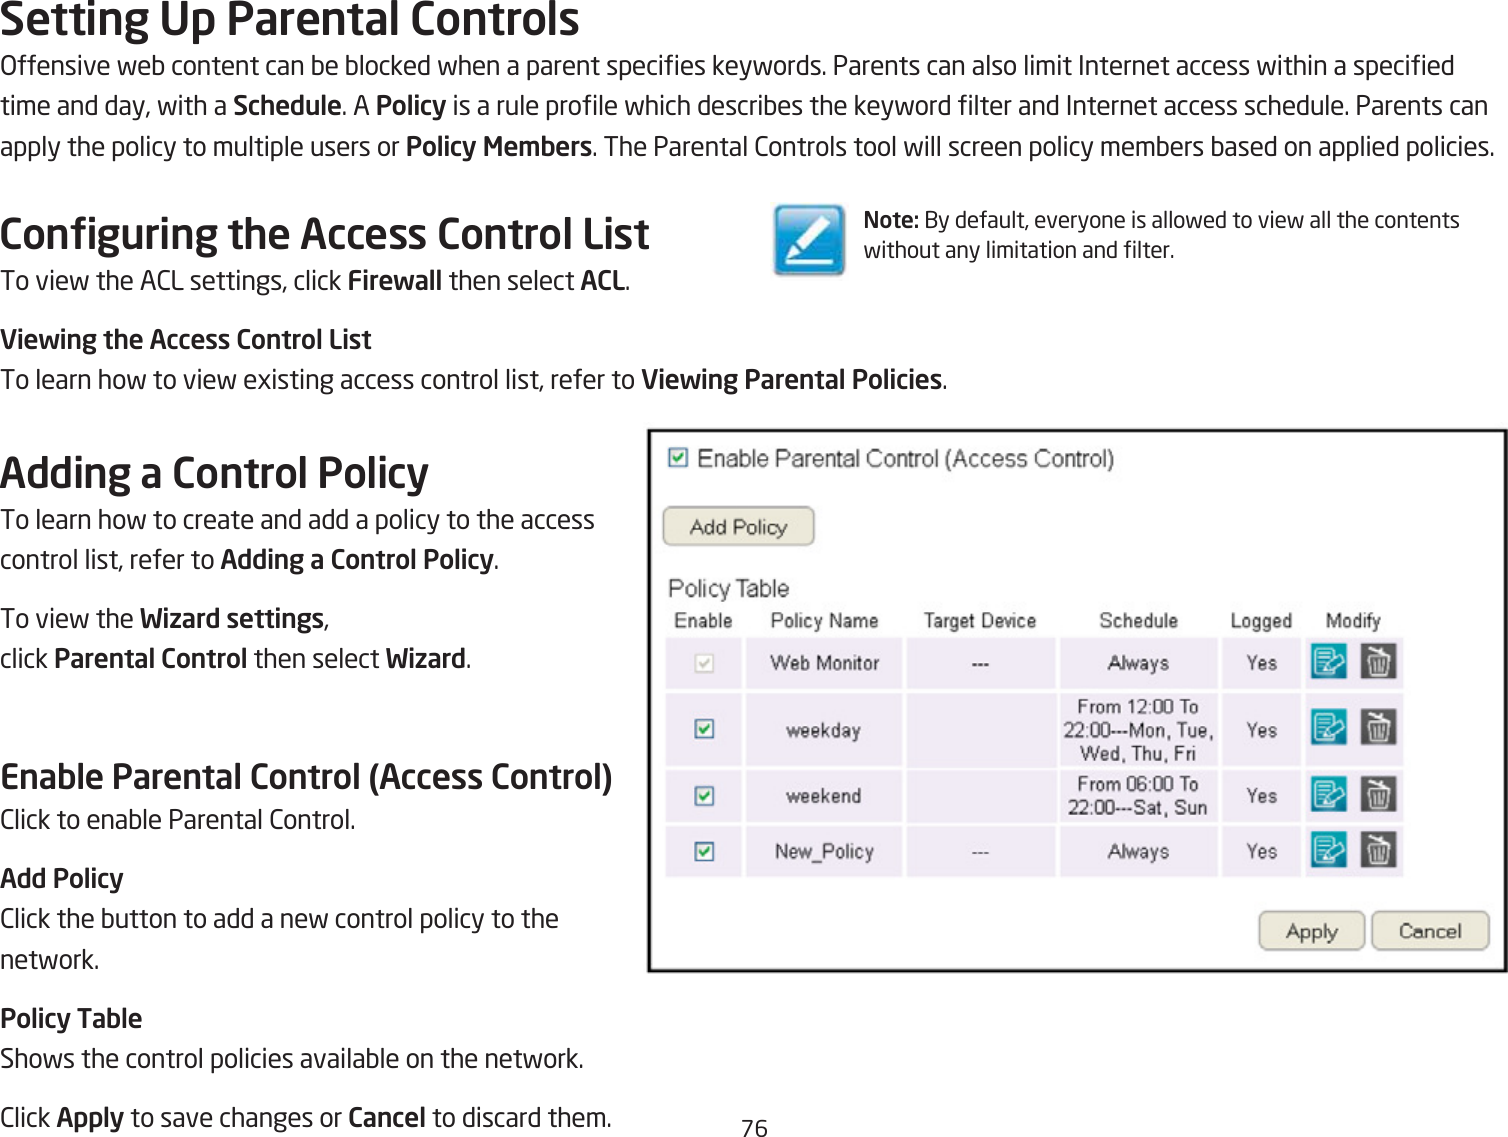 &amp;6Setting Up Parental Controls&gt;ffensive feQ content can Qe Qlocked fhen a parent species keyfords. Parents can also limit Internet access fithin a specied time and day, fith a Schedule. A Policy is a rule prole fhich descriQes the keyford lter and Internet access schedule. Parents can apply the policy to multiple users or Policy Me\bers. The Parental 2ontrols tool fill screen policy memQers Qased on applied policies.Conguring the Access Control ListTo vief the A2L settings, click Firewall then select ACL.Viewing the Access Control ListTo learn hof to vief egisting access control list, refer to Viewing Parental Policies.Adding a Control PolicyTo learn hof to create and add a policy to the access control list, refer to Adding a Control Policy.To vief the Wizard settings, click Parental Control then select Wizard.Enable Parental Control (Access Control)2lick to enaQle Parental 2ontrol.Add Policy2lick the Qutton to add a nef control policy to the netfork.Policy TableShofs the control policies availaQle on the netfork.2lick Apply to save changes or Cancel to discard them.Note: 1y default, everyone is allofed to vief all the contents fithout any limitation and lter.